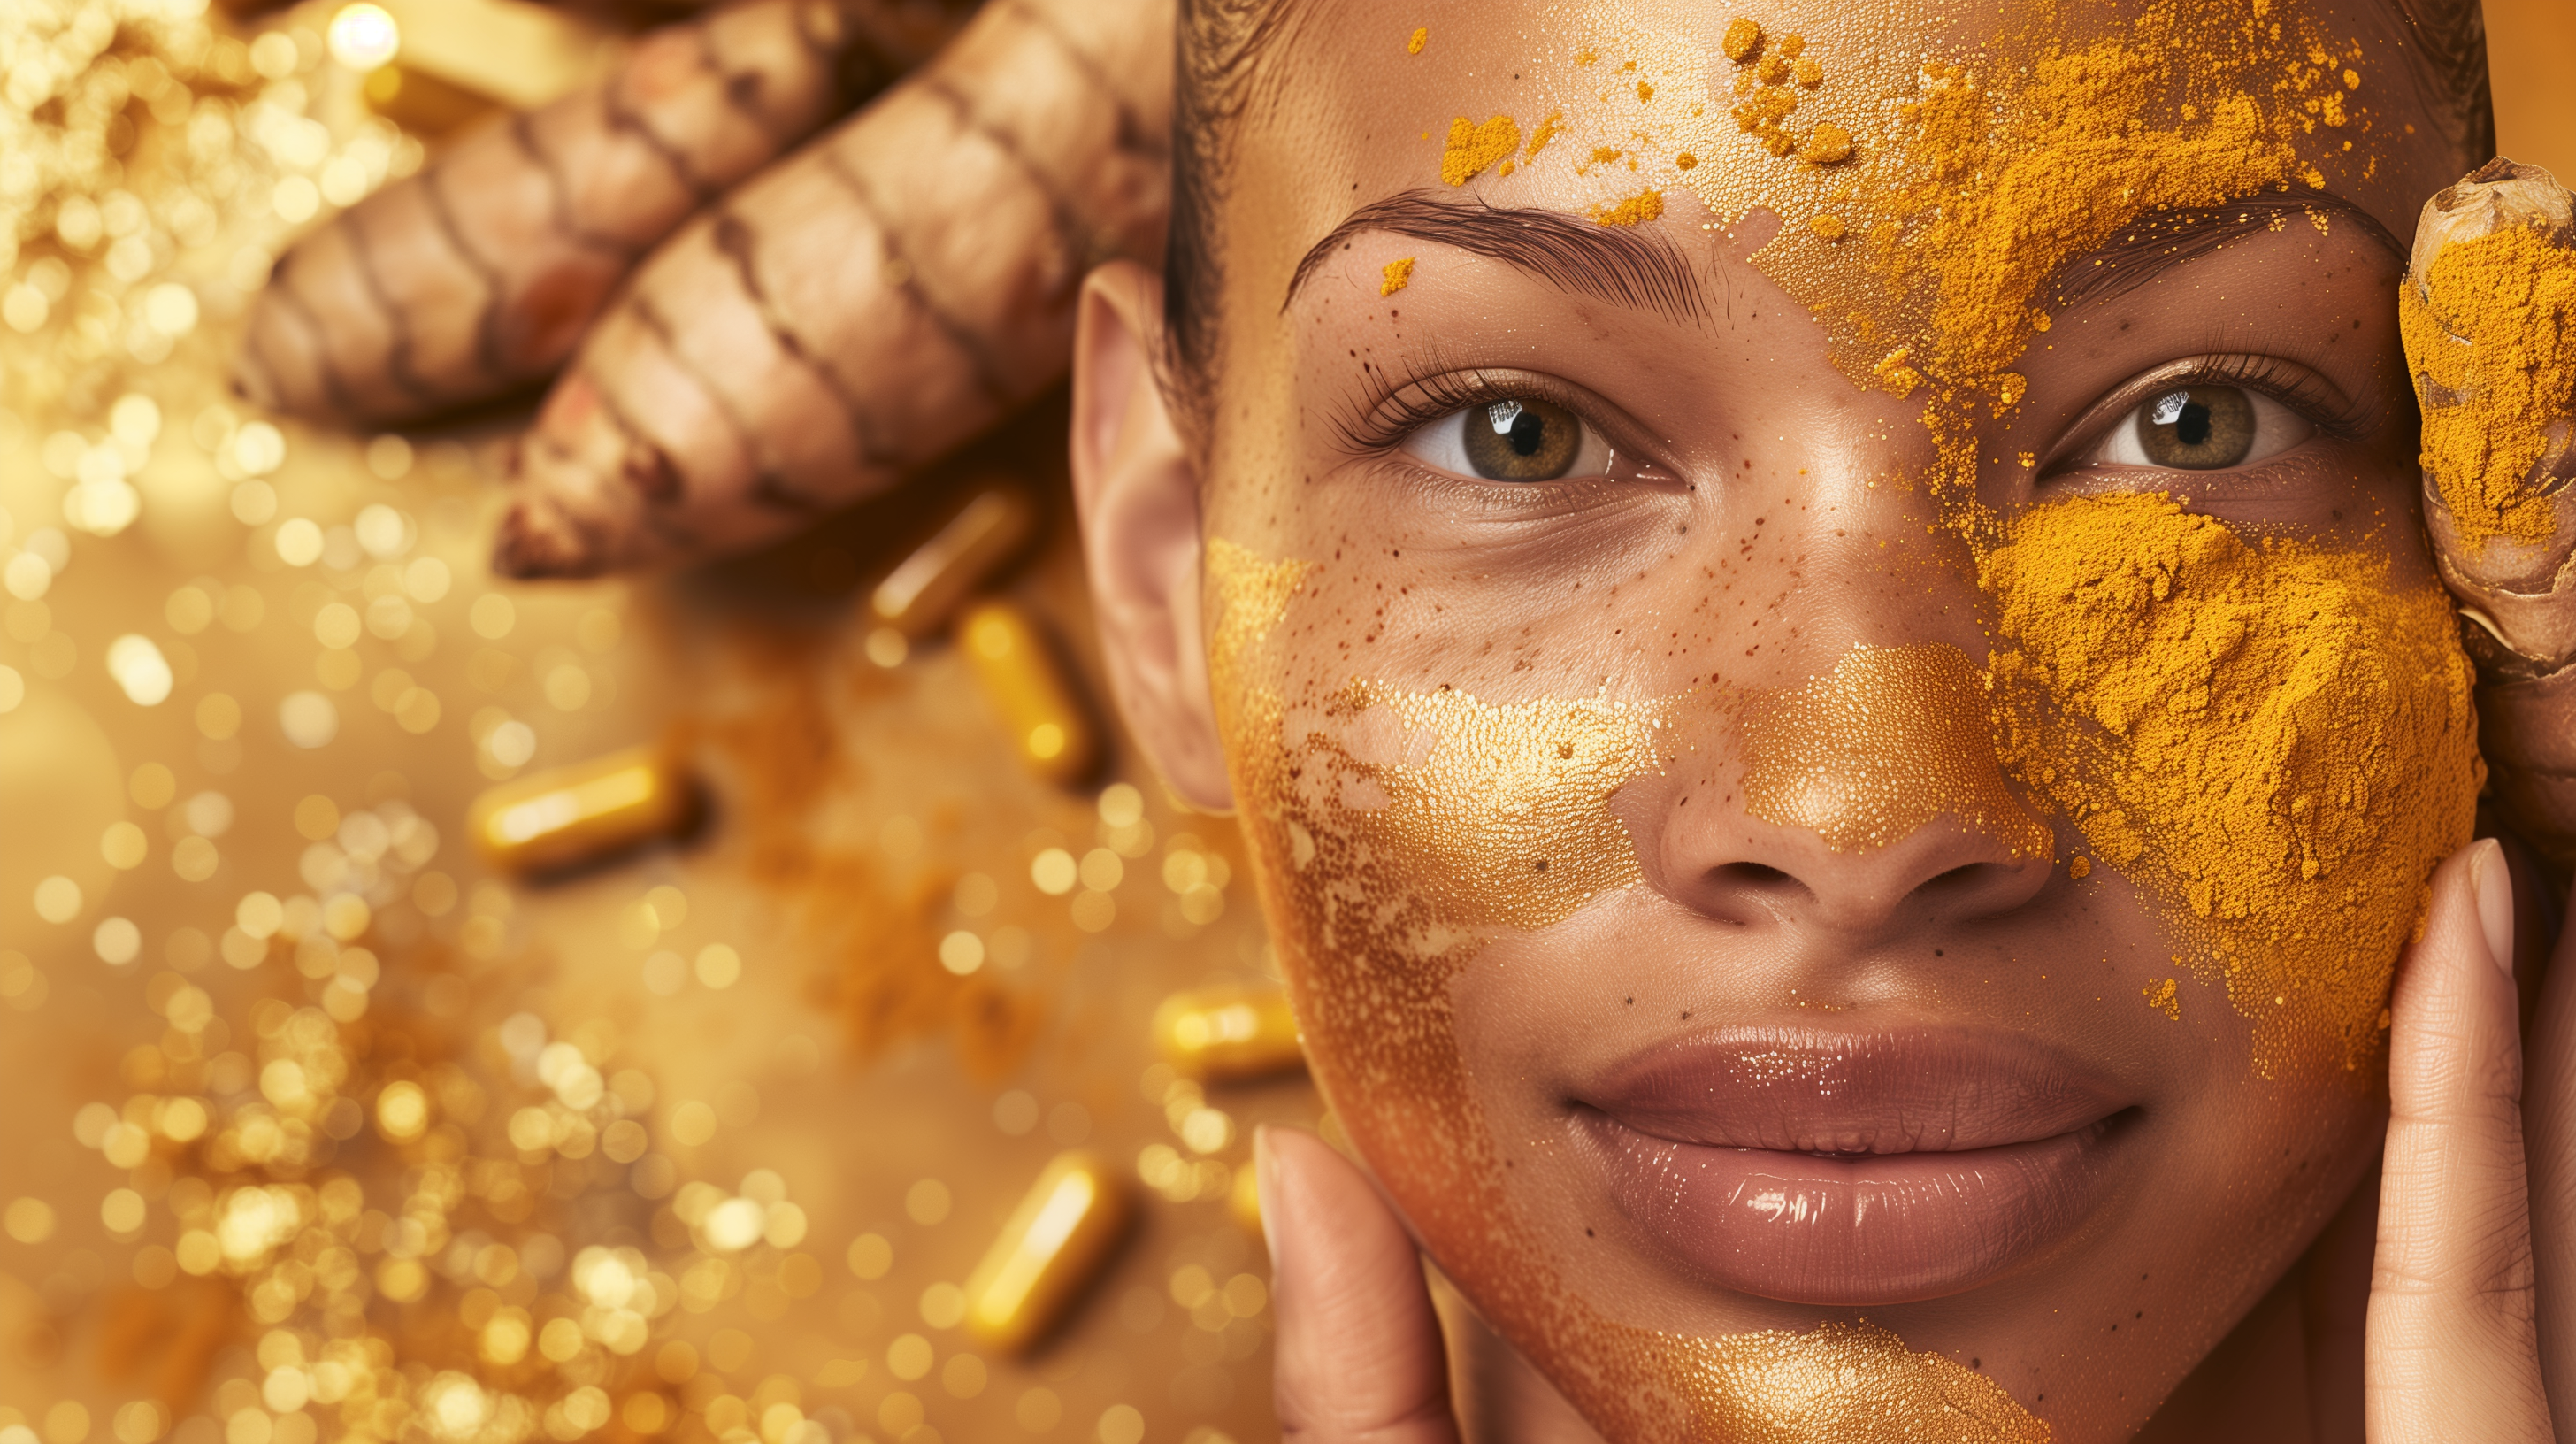 clear-skinned person, turmeric root, with a background of soft, glowing, golden hues and scattered turmeric powde